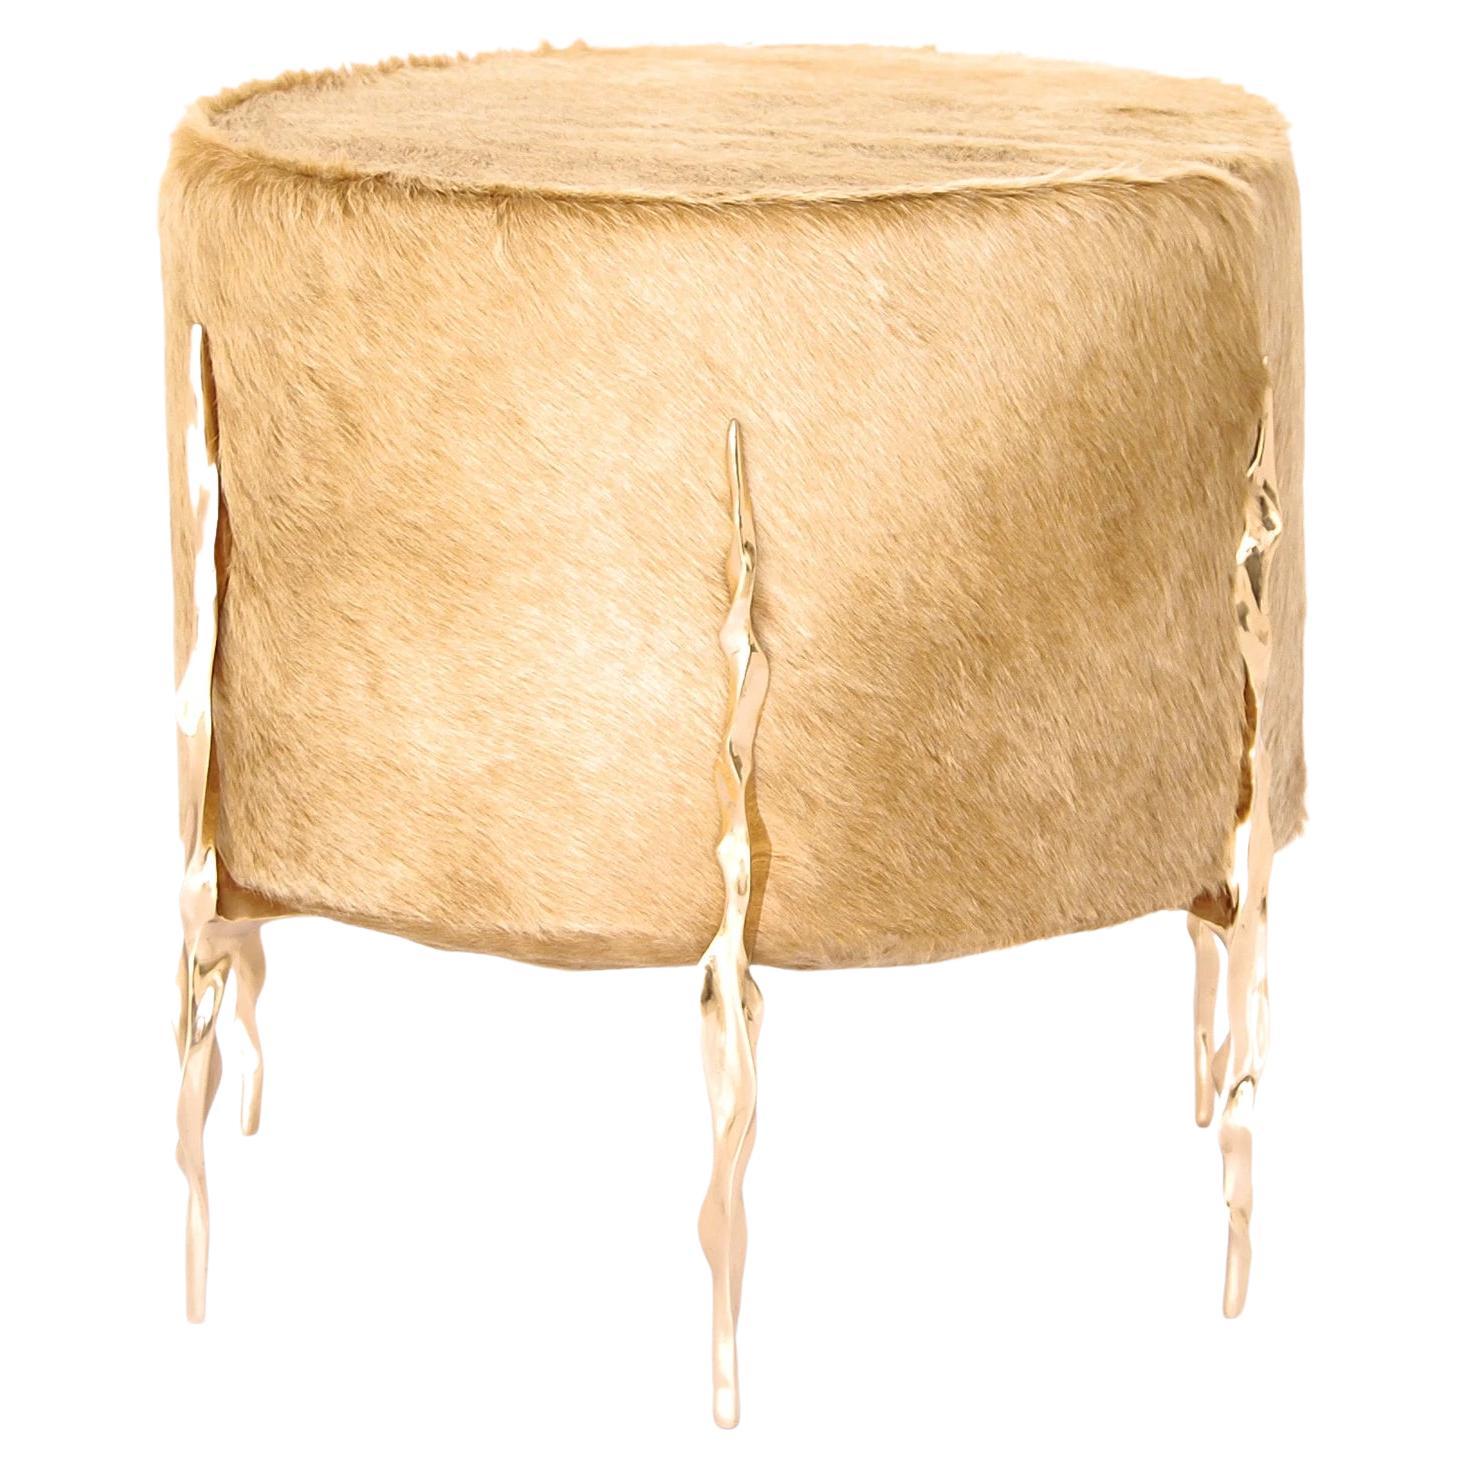 The timeless aesthetic and durability of cowhide meets the modern edged signature Fakasaka styling with 6 spear headed hand molded and carved polished bronze legs, creating the fierce Ava Ottoman.

Hand made to order, this Ottoman is also